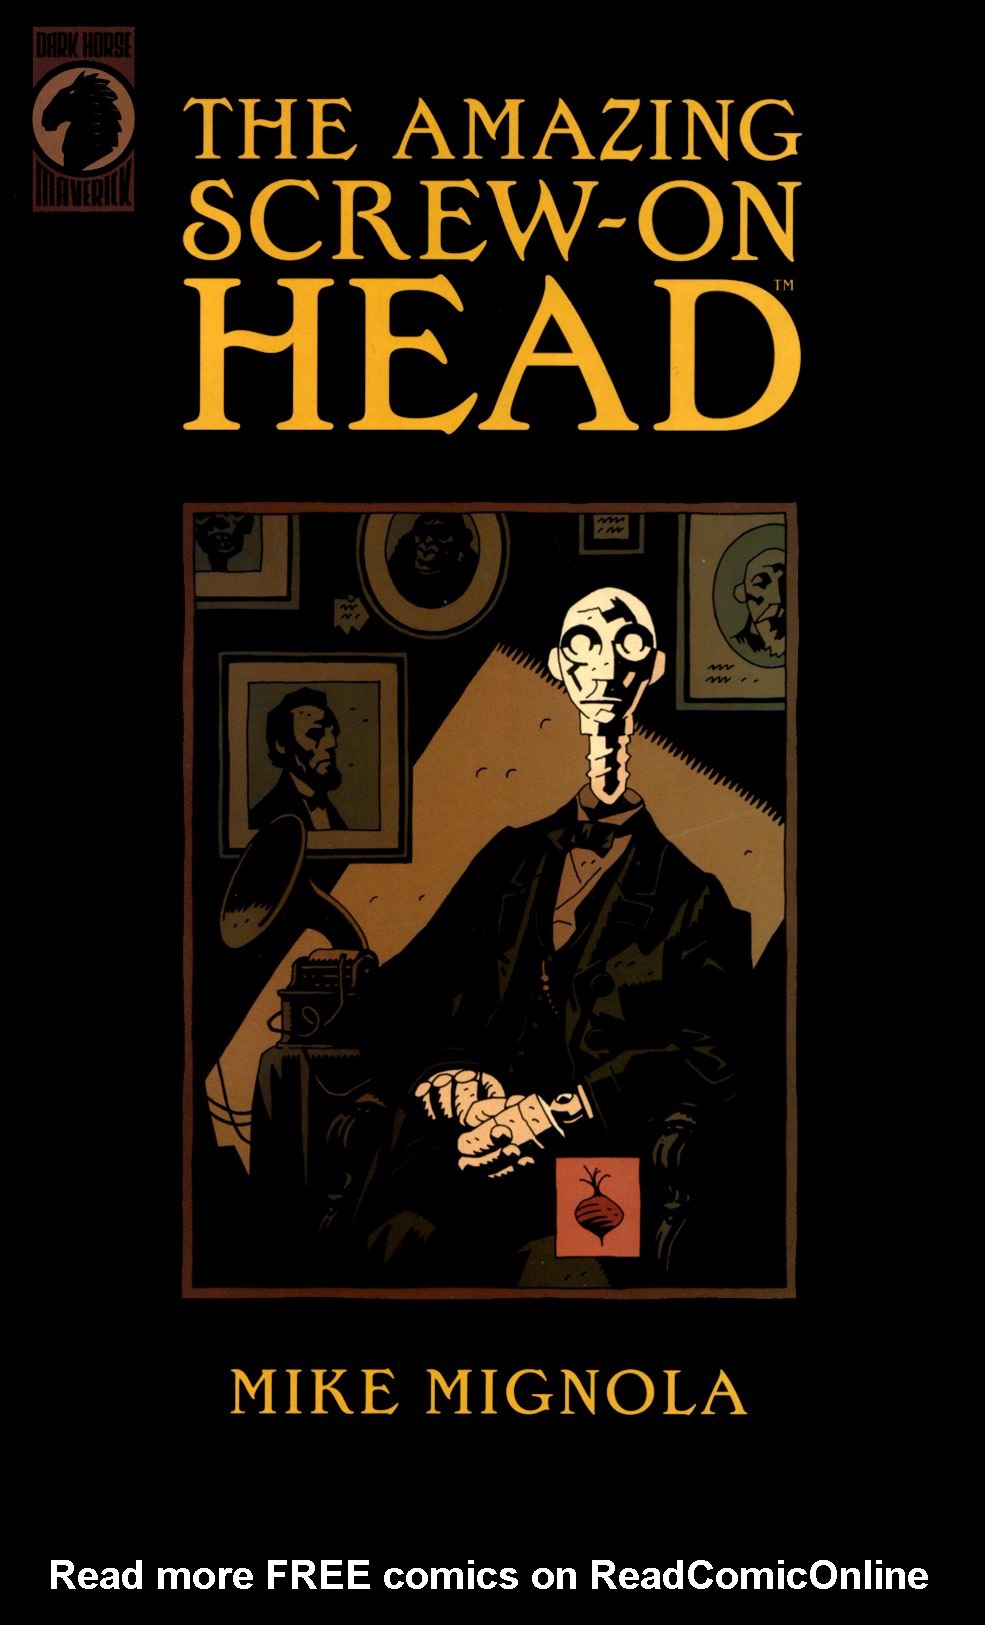 Read online The Amazing Screw-On Head comic -  Issue # Full - 1